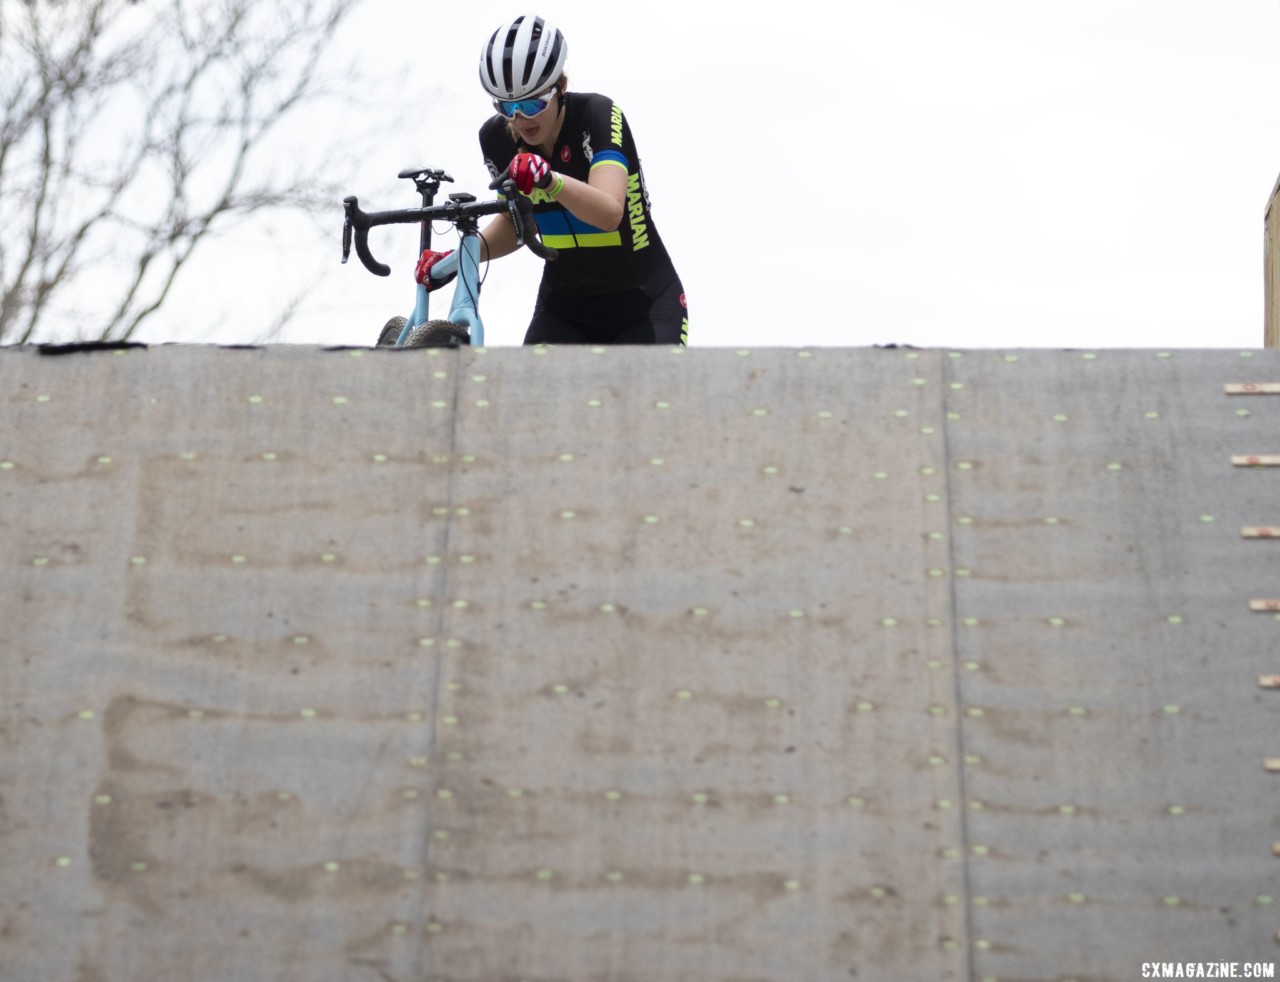 Laurel Rathbun goes over the flyover en route to 6th place. Collegiate Varsity Women. 2018 Cyclocross National Championships, Louisville, KY. © A. Yee / Cyclocross Magazine